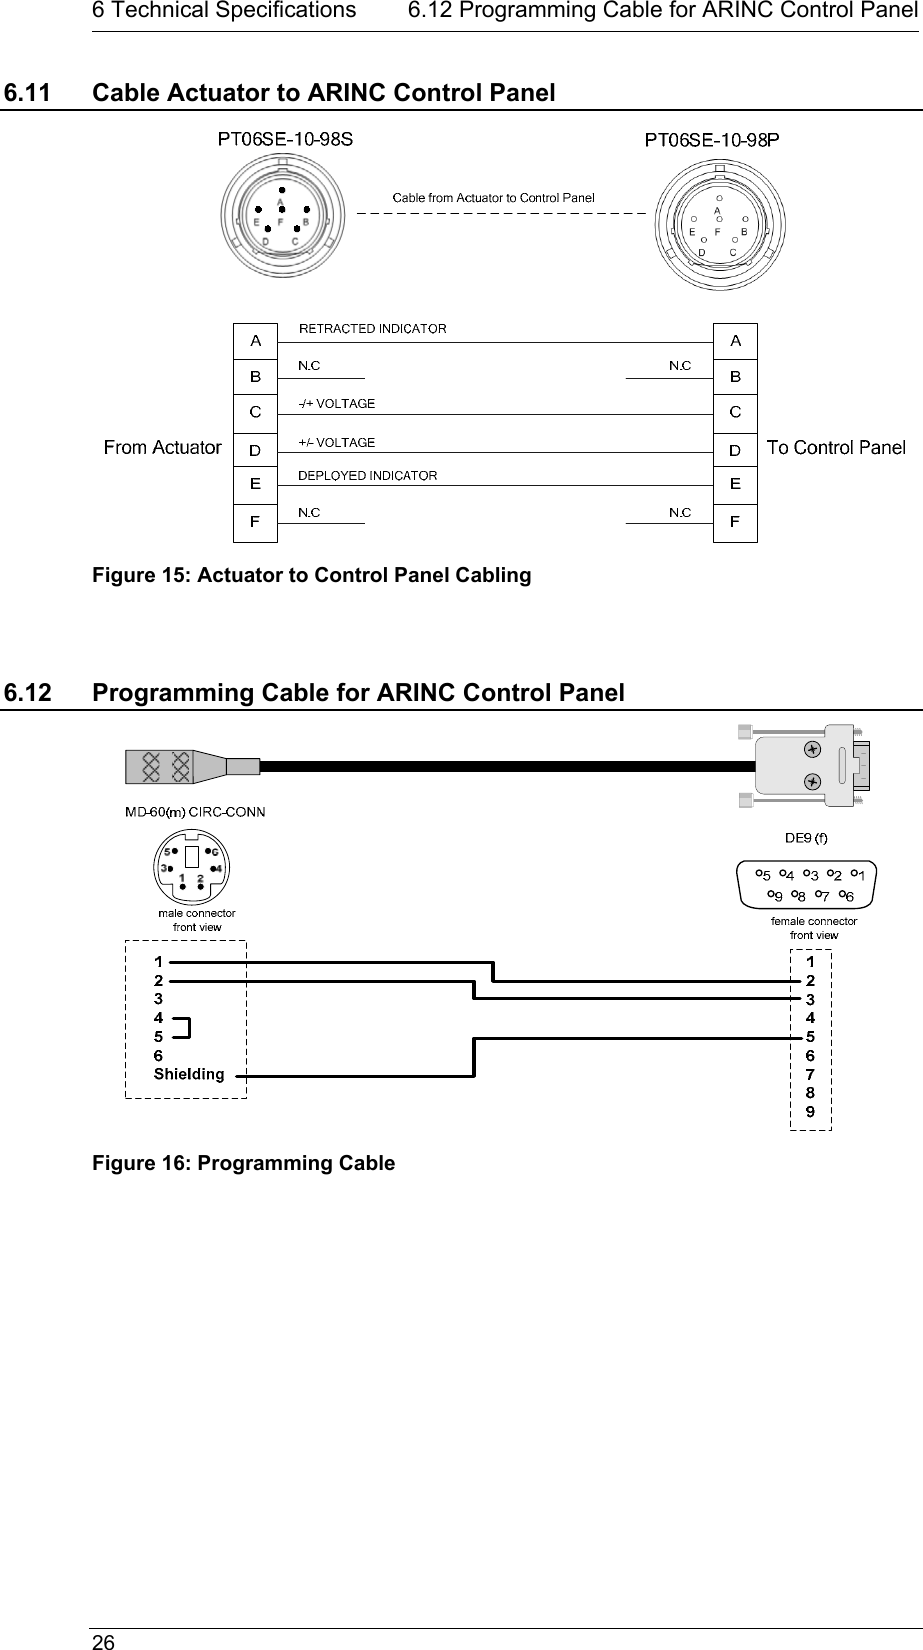   26  6 Technical Specifications  6.12 Programming Cable for ARINC Control Panel6.11  Cable Actuator to ARINC Control Panel  Figure 15: Actuator to Control Panel Cabling   6.12  Programming Cable for ARINC Control Panel  Figure 16: Programming Cable  